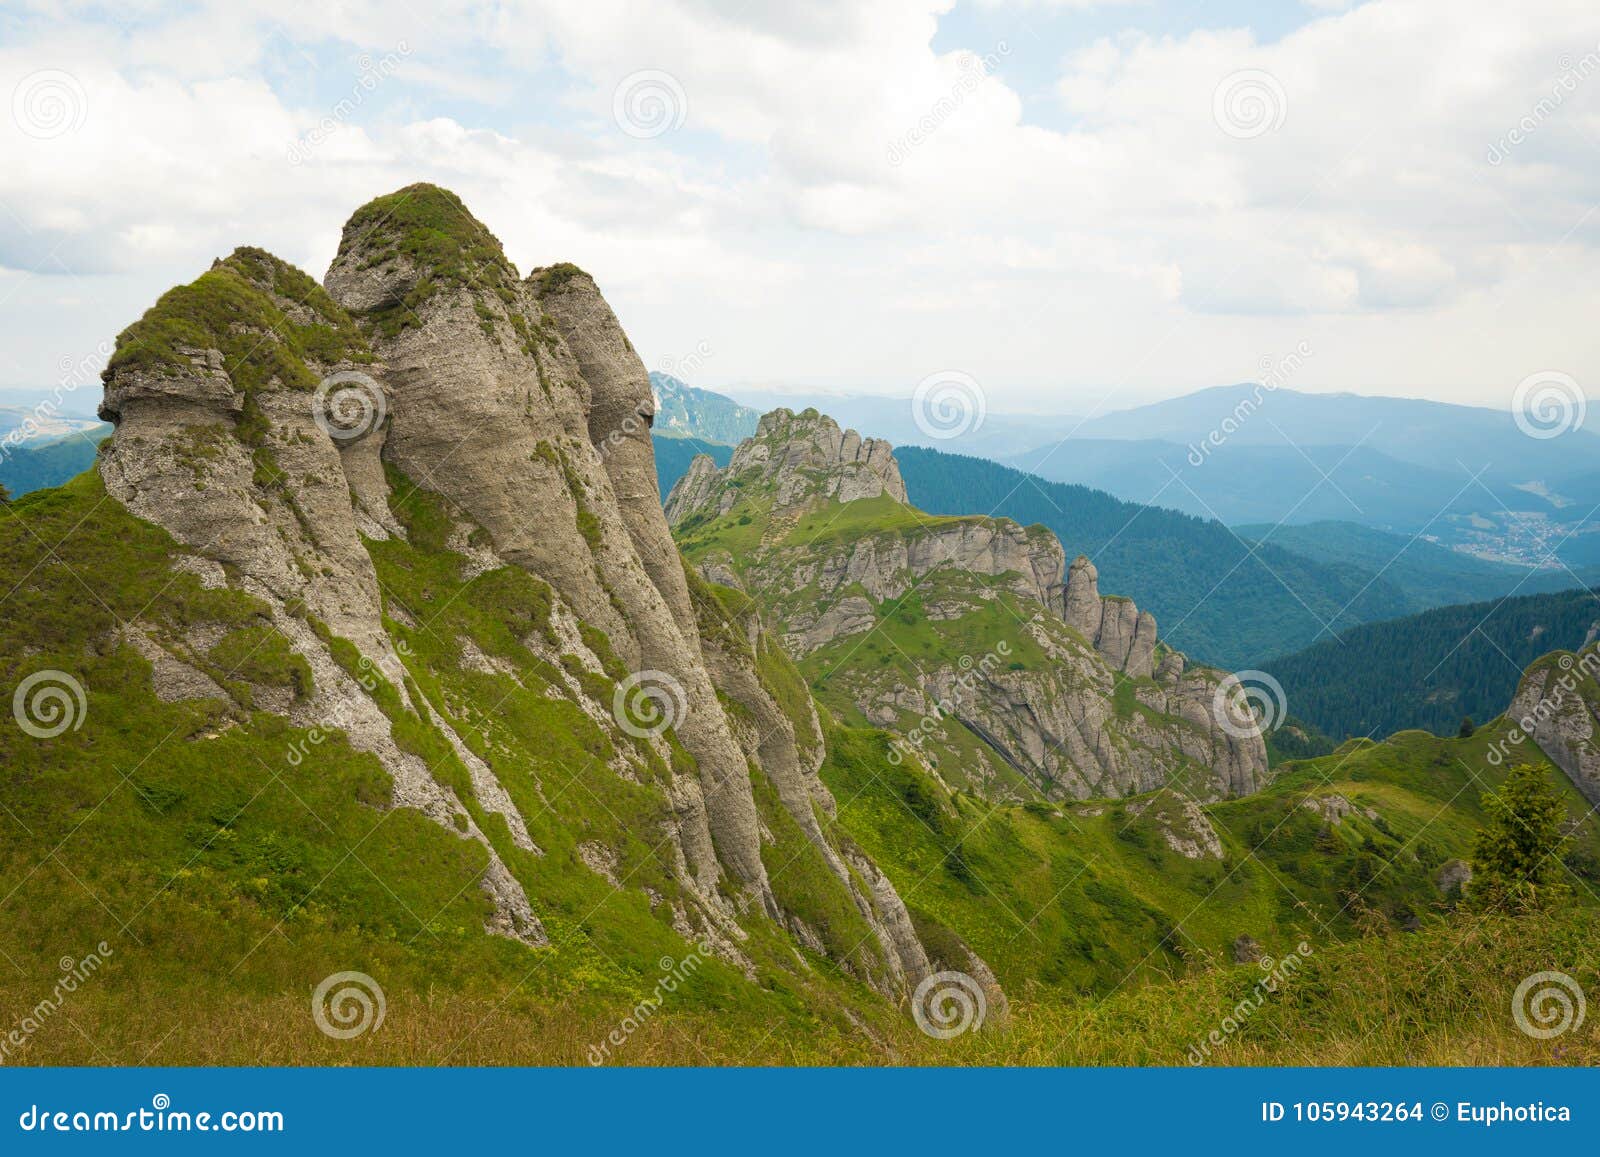 ciucas mountains, romania, a sunny summer day, special geomorphology